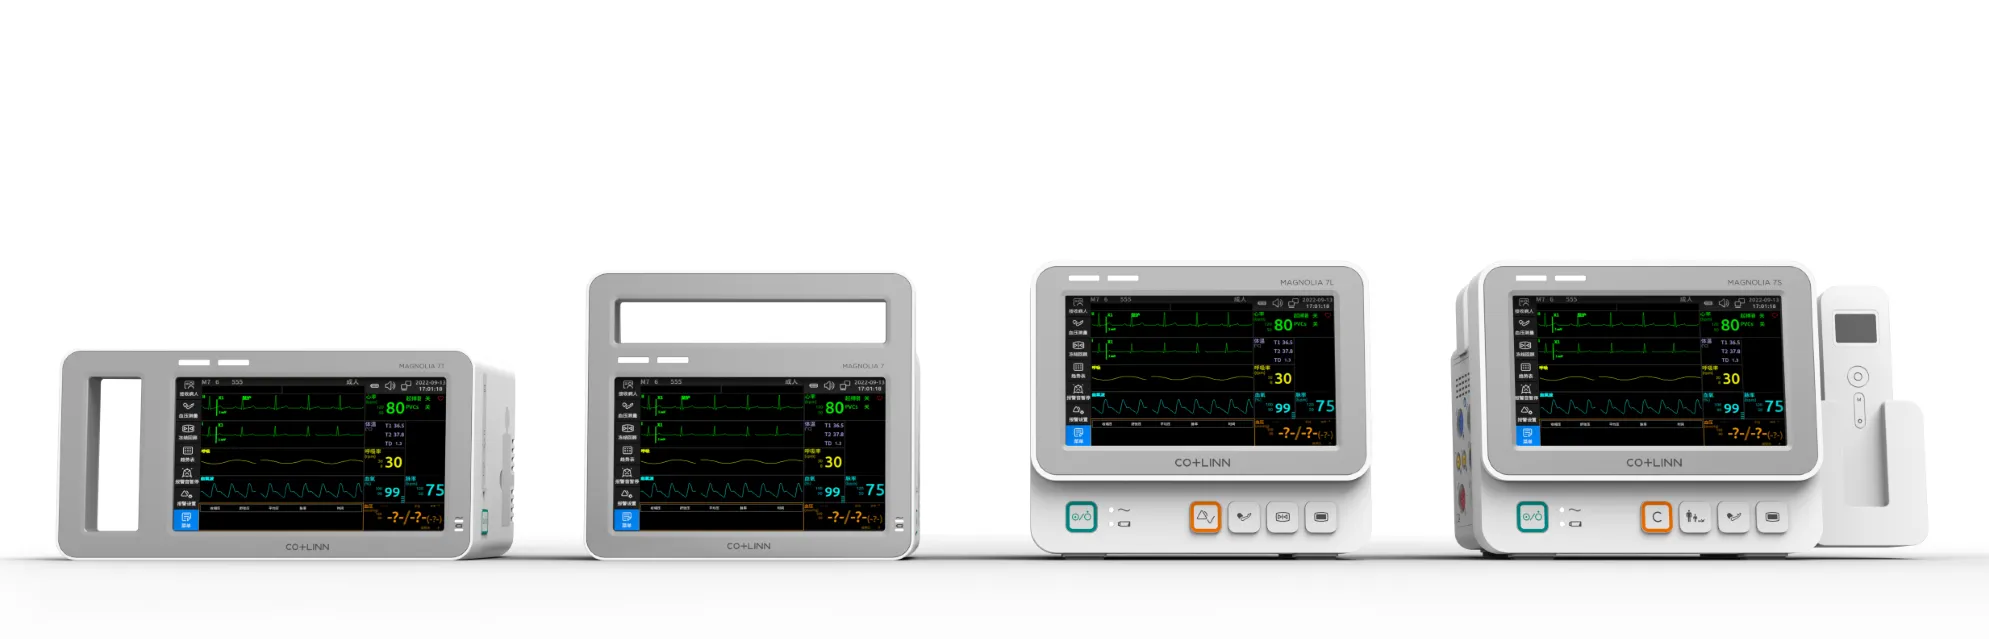 patient monitor, anesthesia monitor, central monitoring system, acute care smart monitoring, medical AI